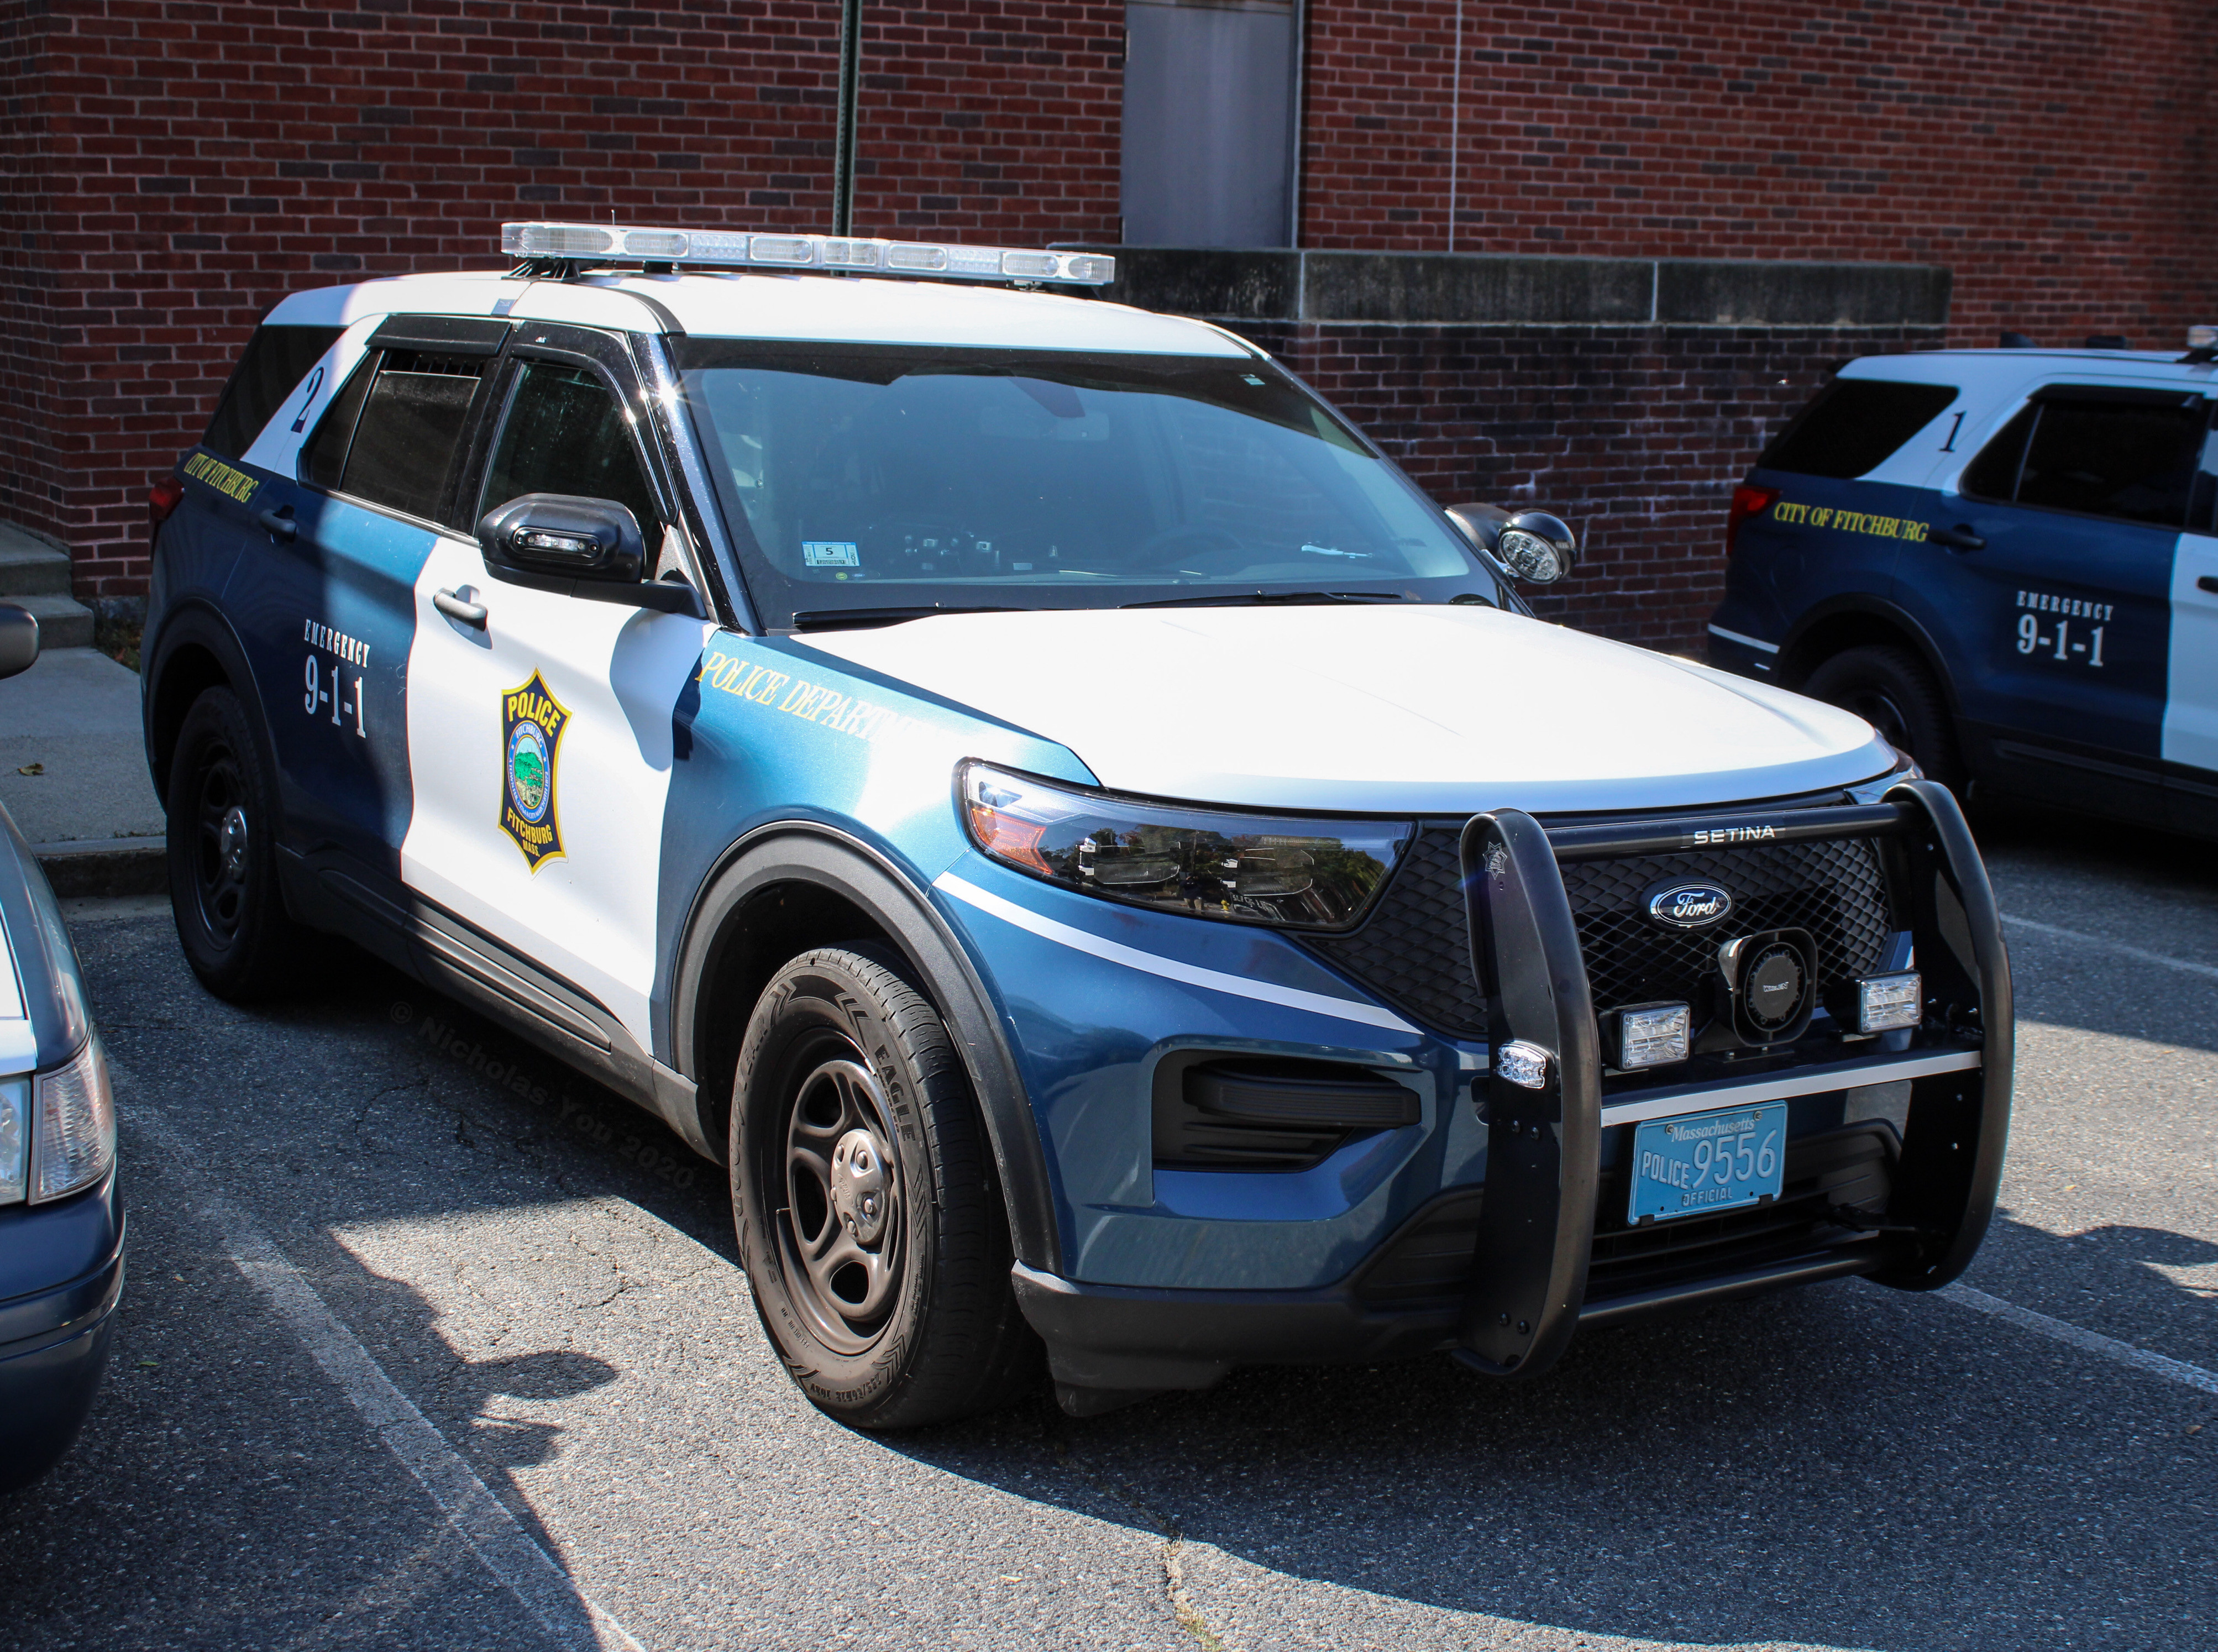 A photo  of Fitchburg Police
            Car 2, a 2020 Ford Police Interceptor Utility             taken by Nicholas You